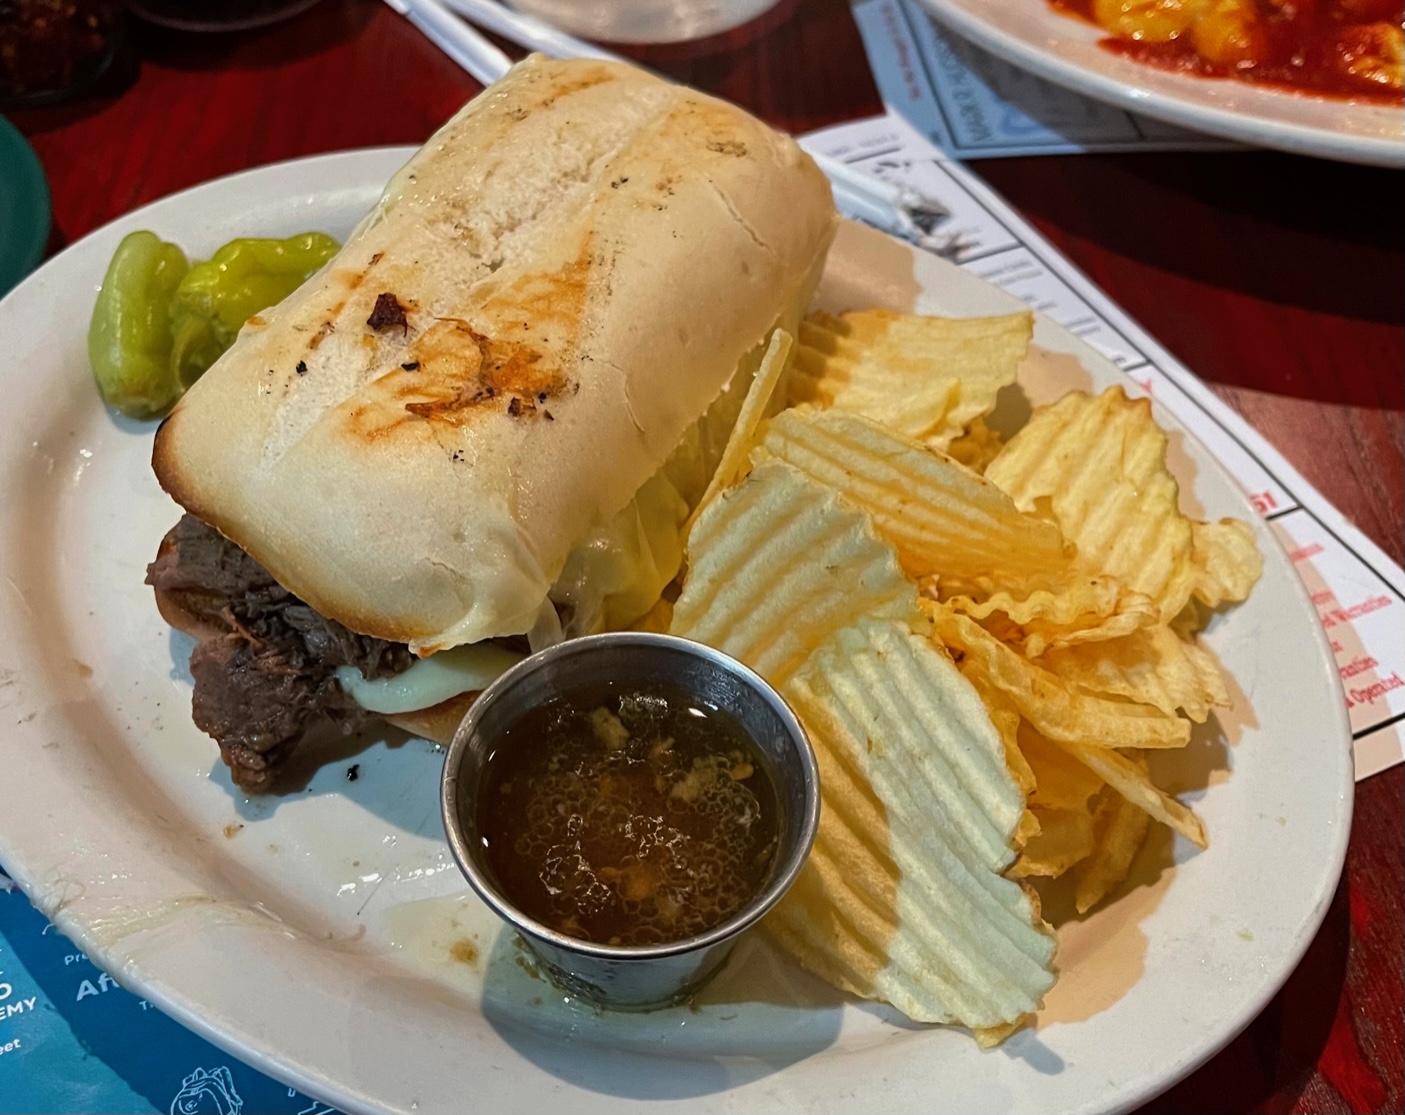 On a white plate, there is an Italian beef sandwich with ridged chips and a cup of au jus. Photo by Stephanie Wheatley.